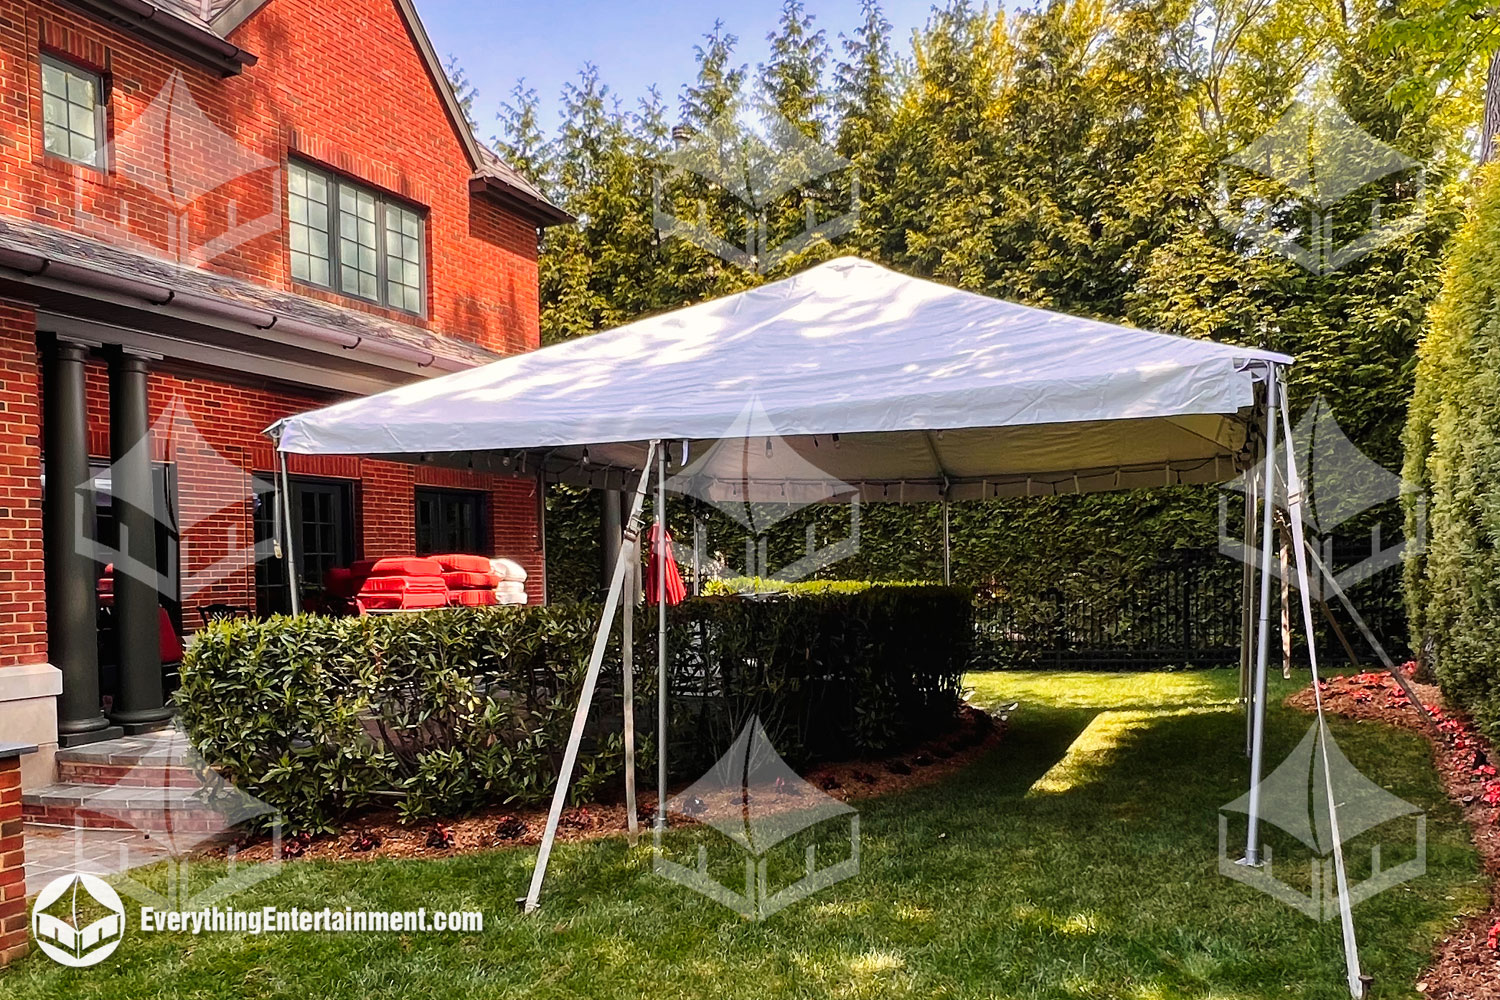 white top tent set up in backyard on grass